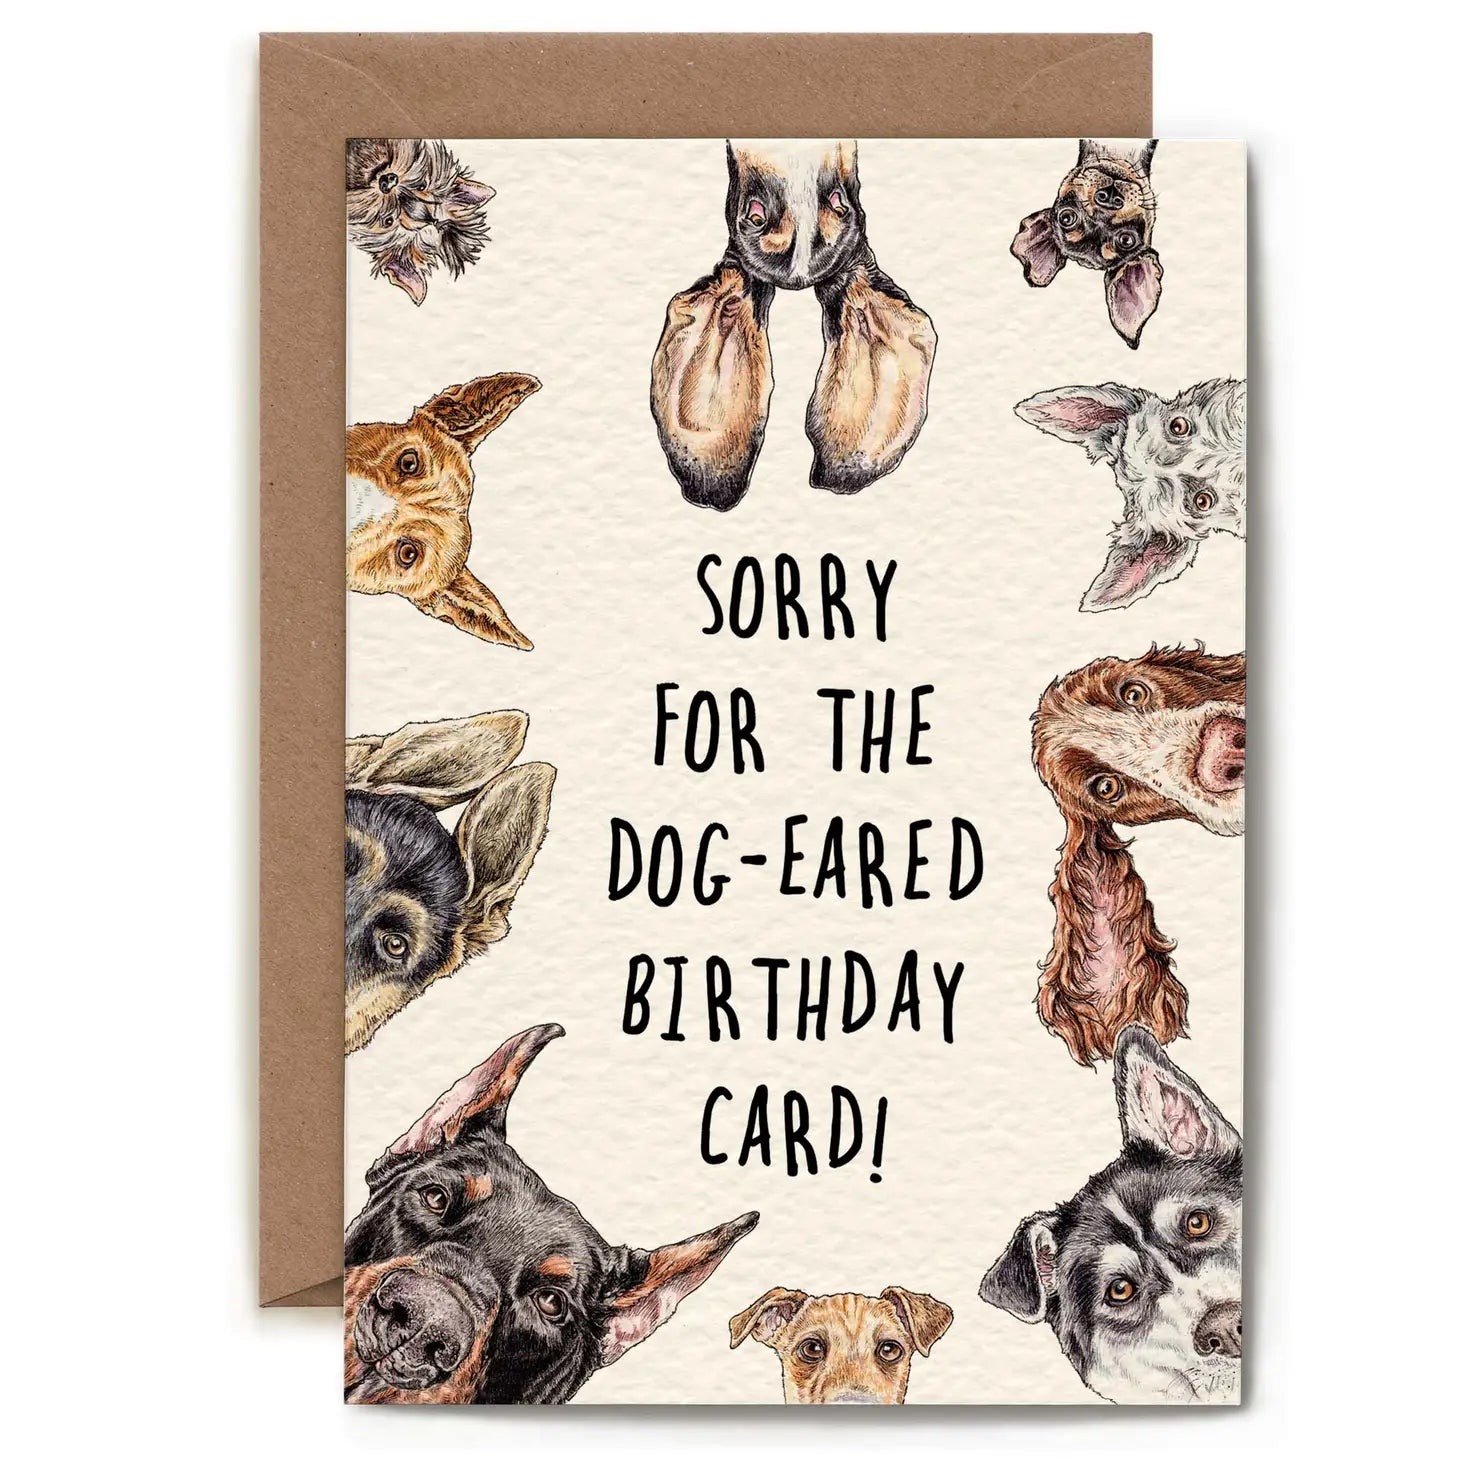 Greeting card "Sorry for the dog-eared card"